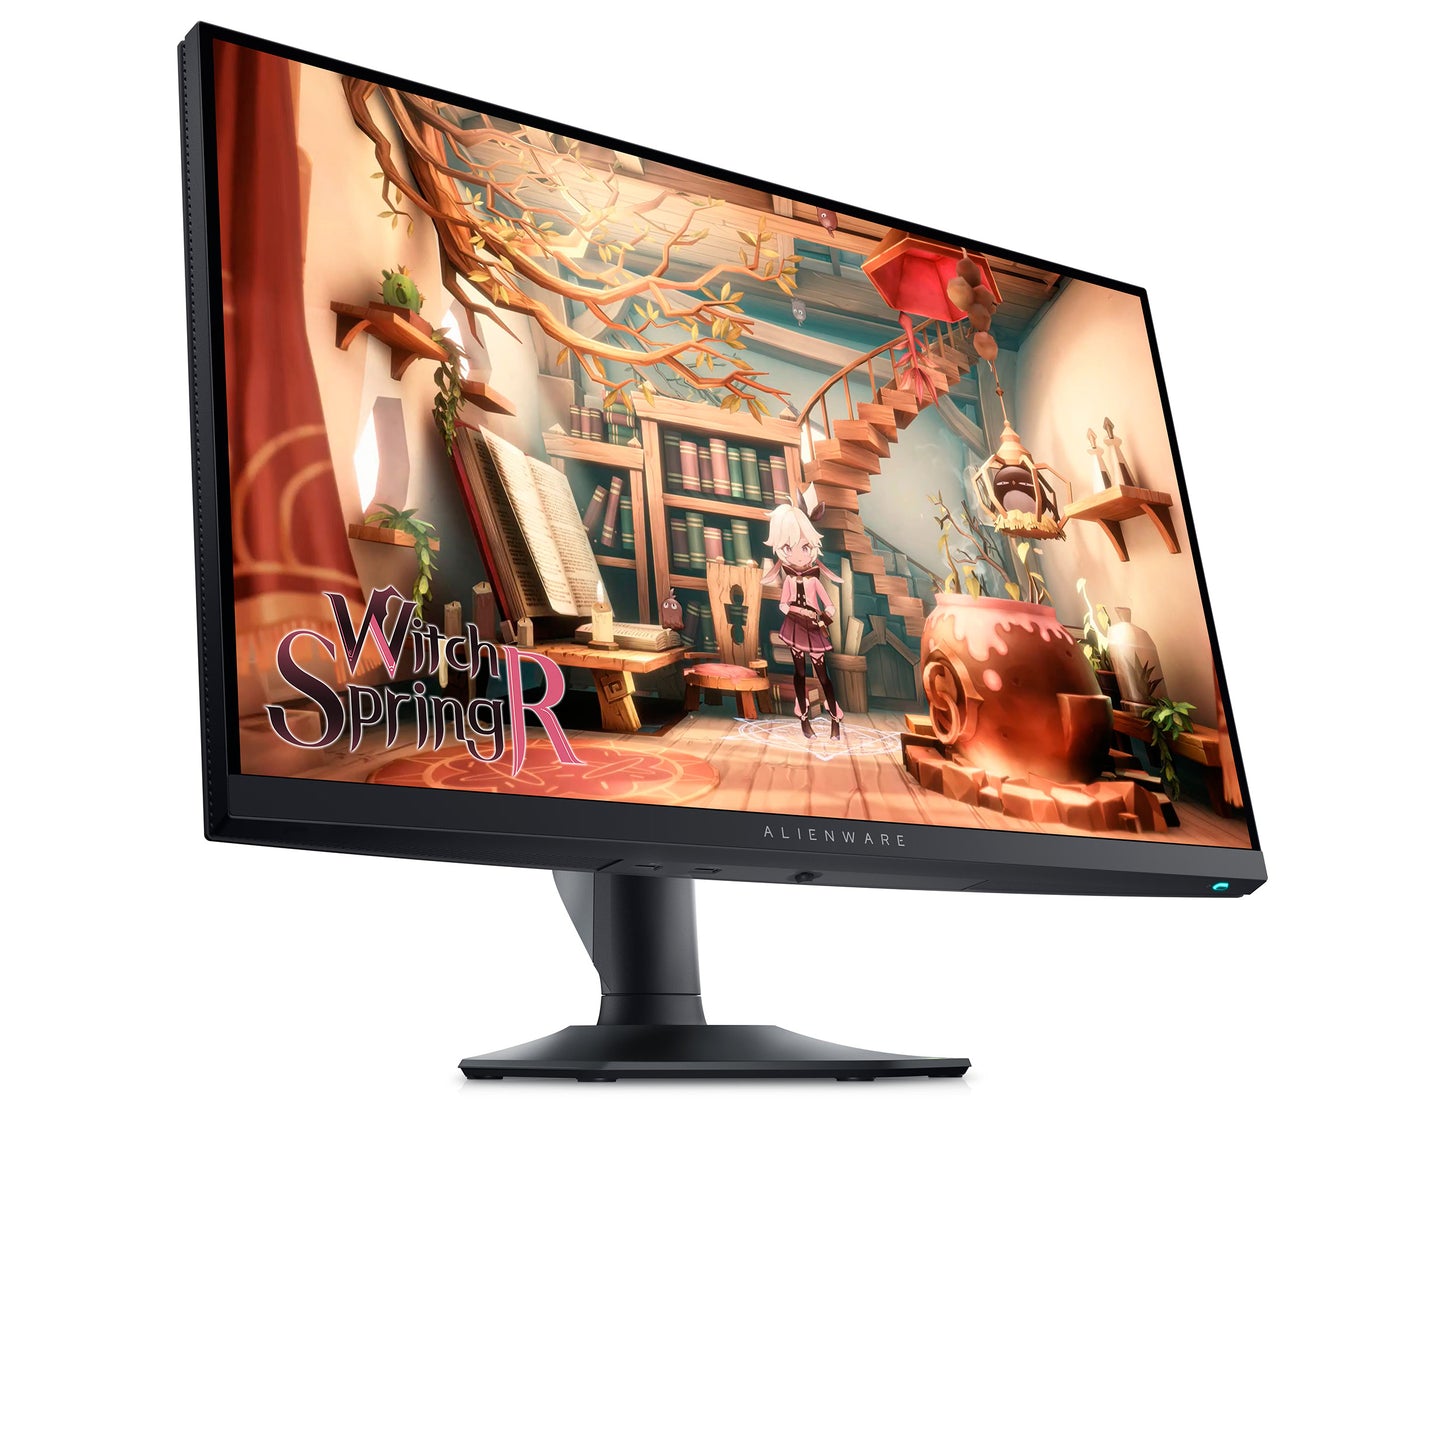 Alienware 27 Gaming Monitor - AW2724DM